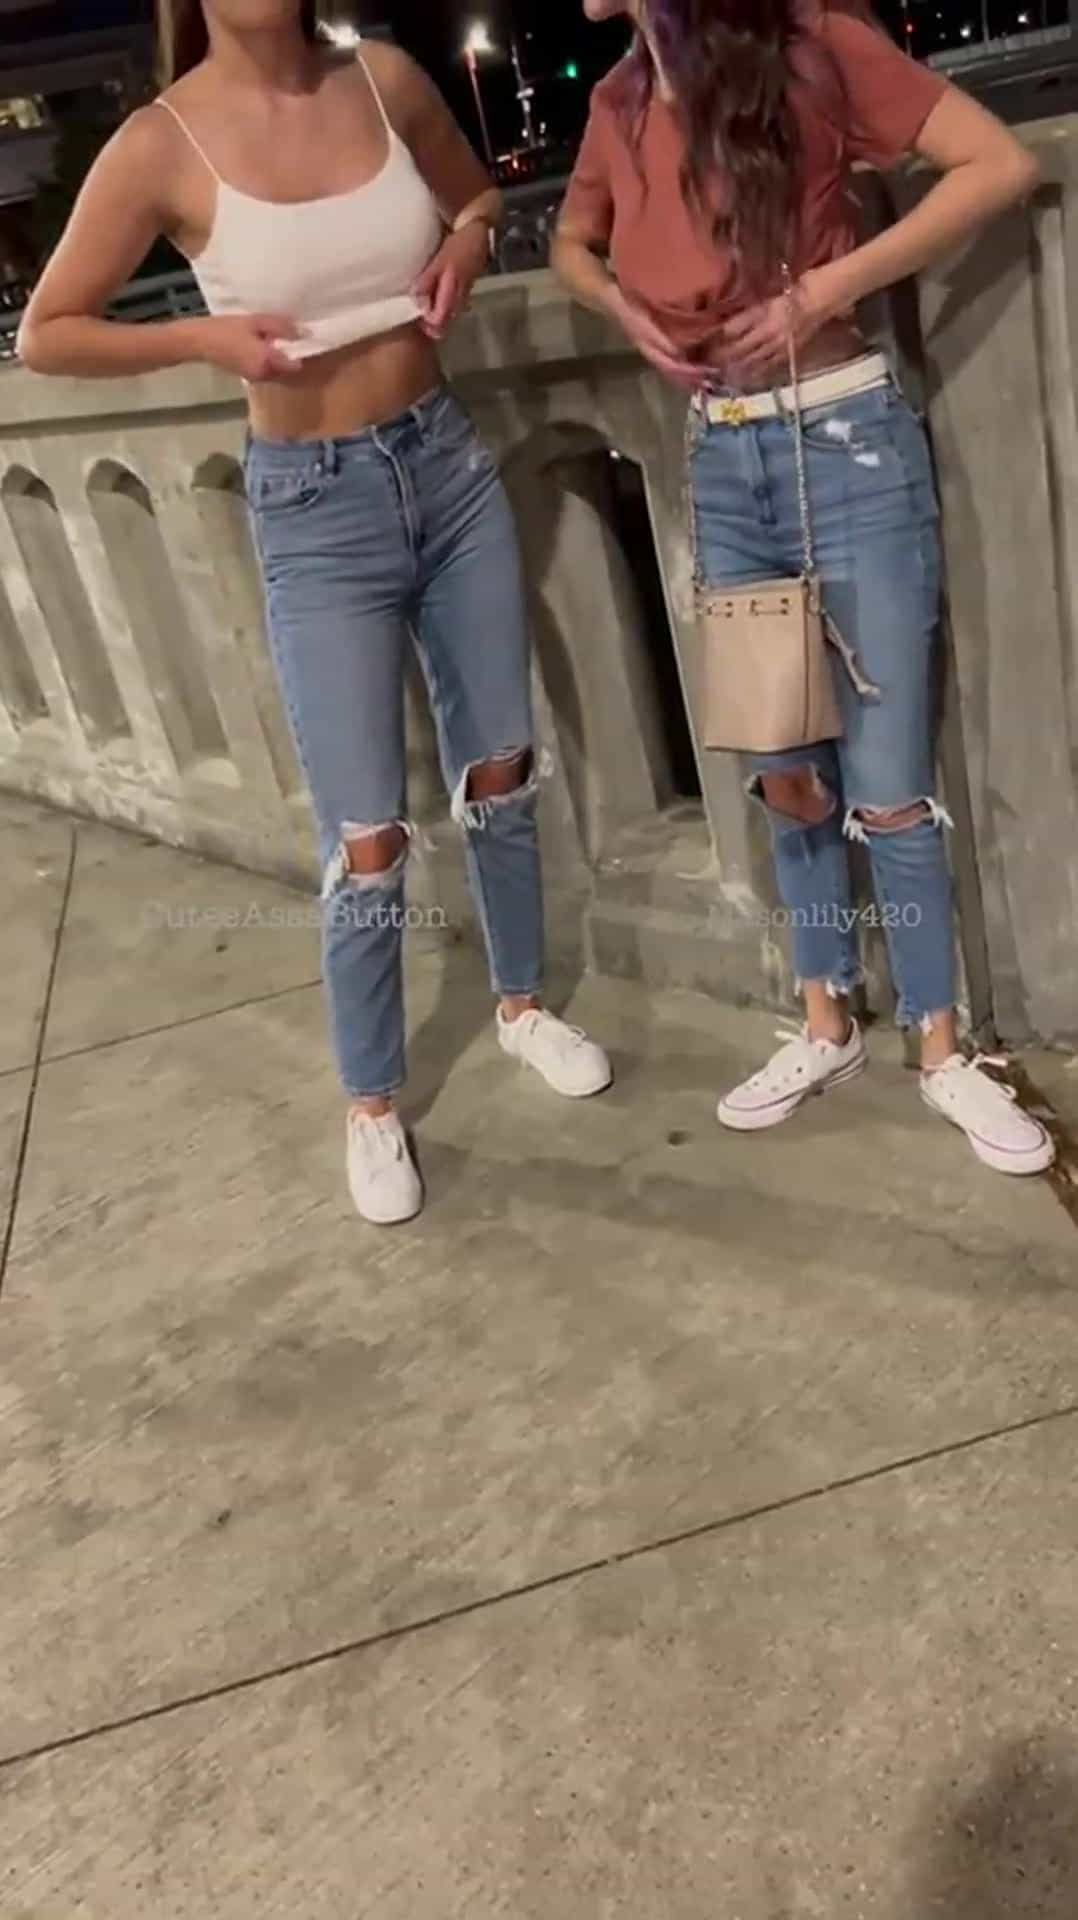 Flashing my tits in public is definitely my favorite especially with a friend:)